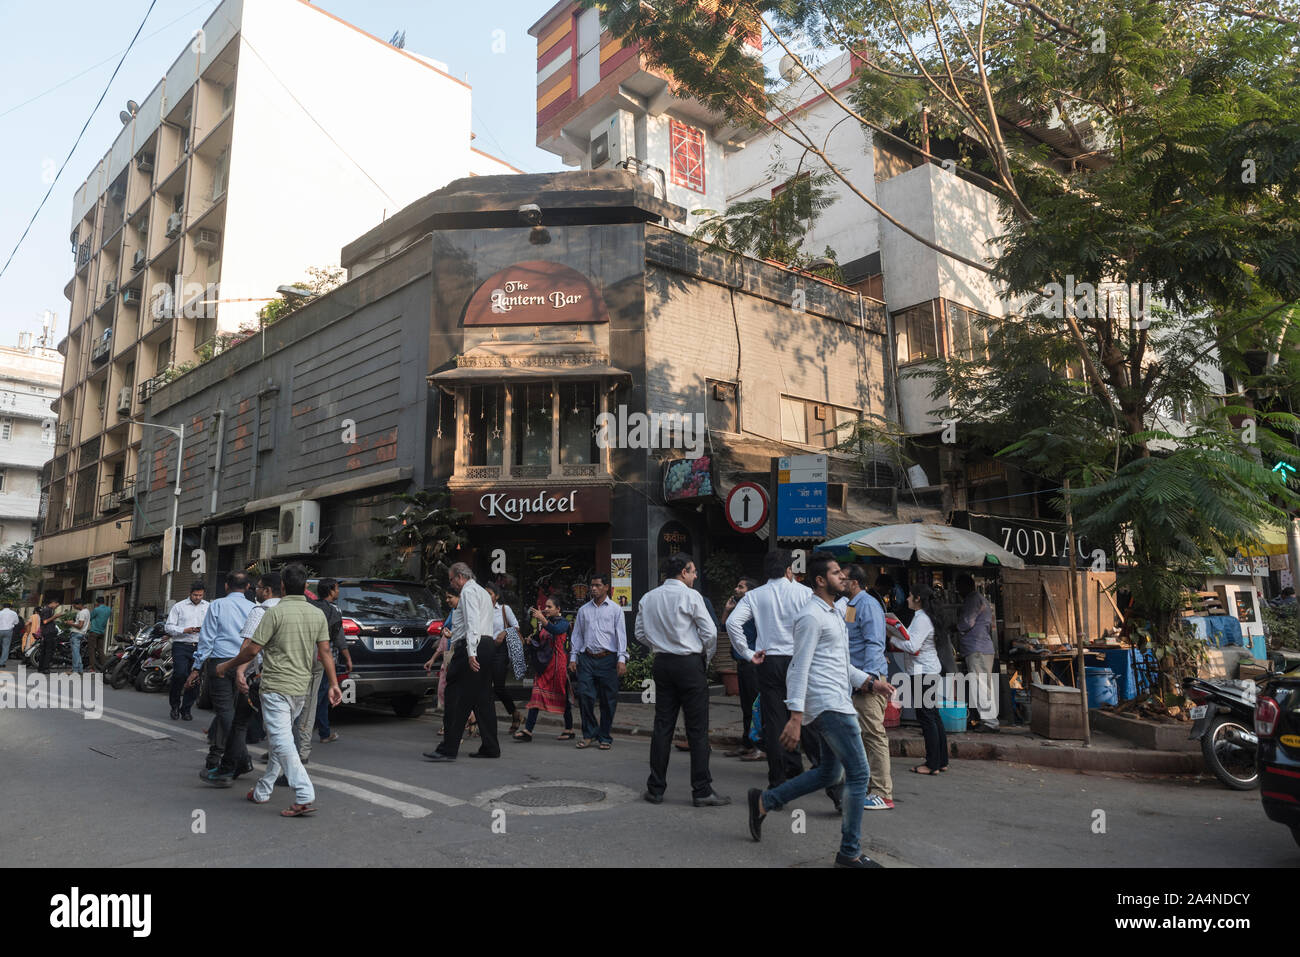 Office goers walk in front of Kandeel restaurant in the fort area of Mumbai, India. This is also known as the art district of Mumbai. Stock Photo